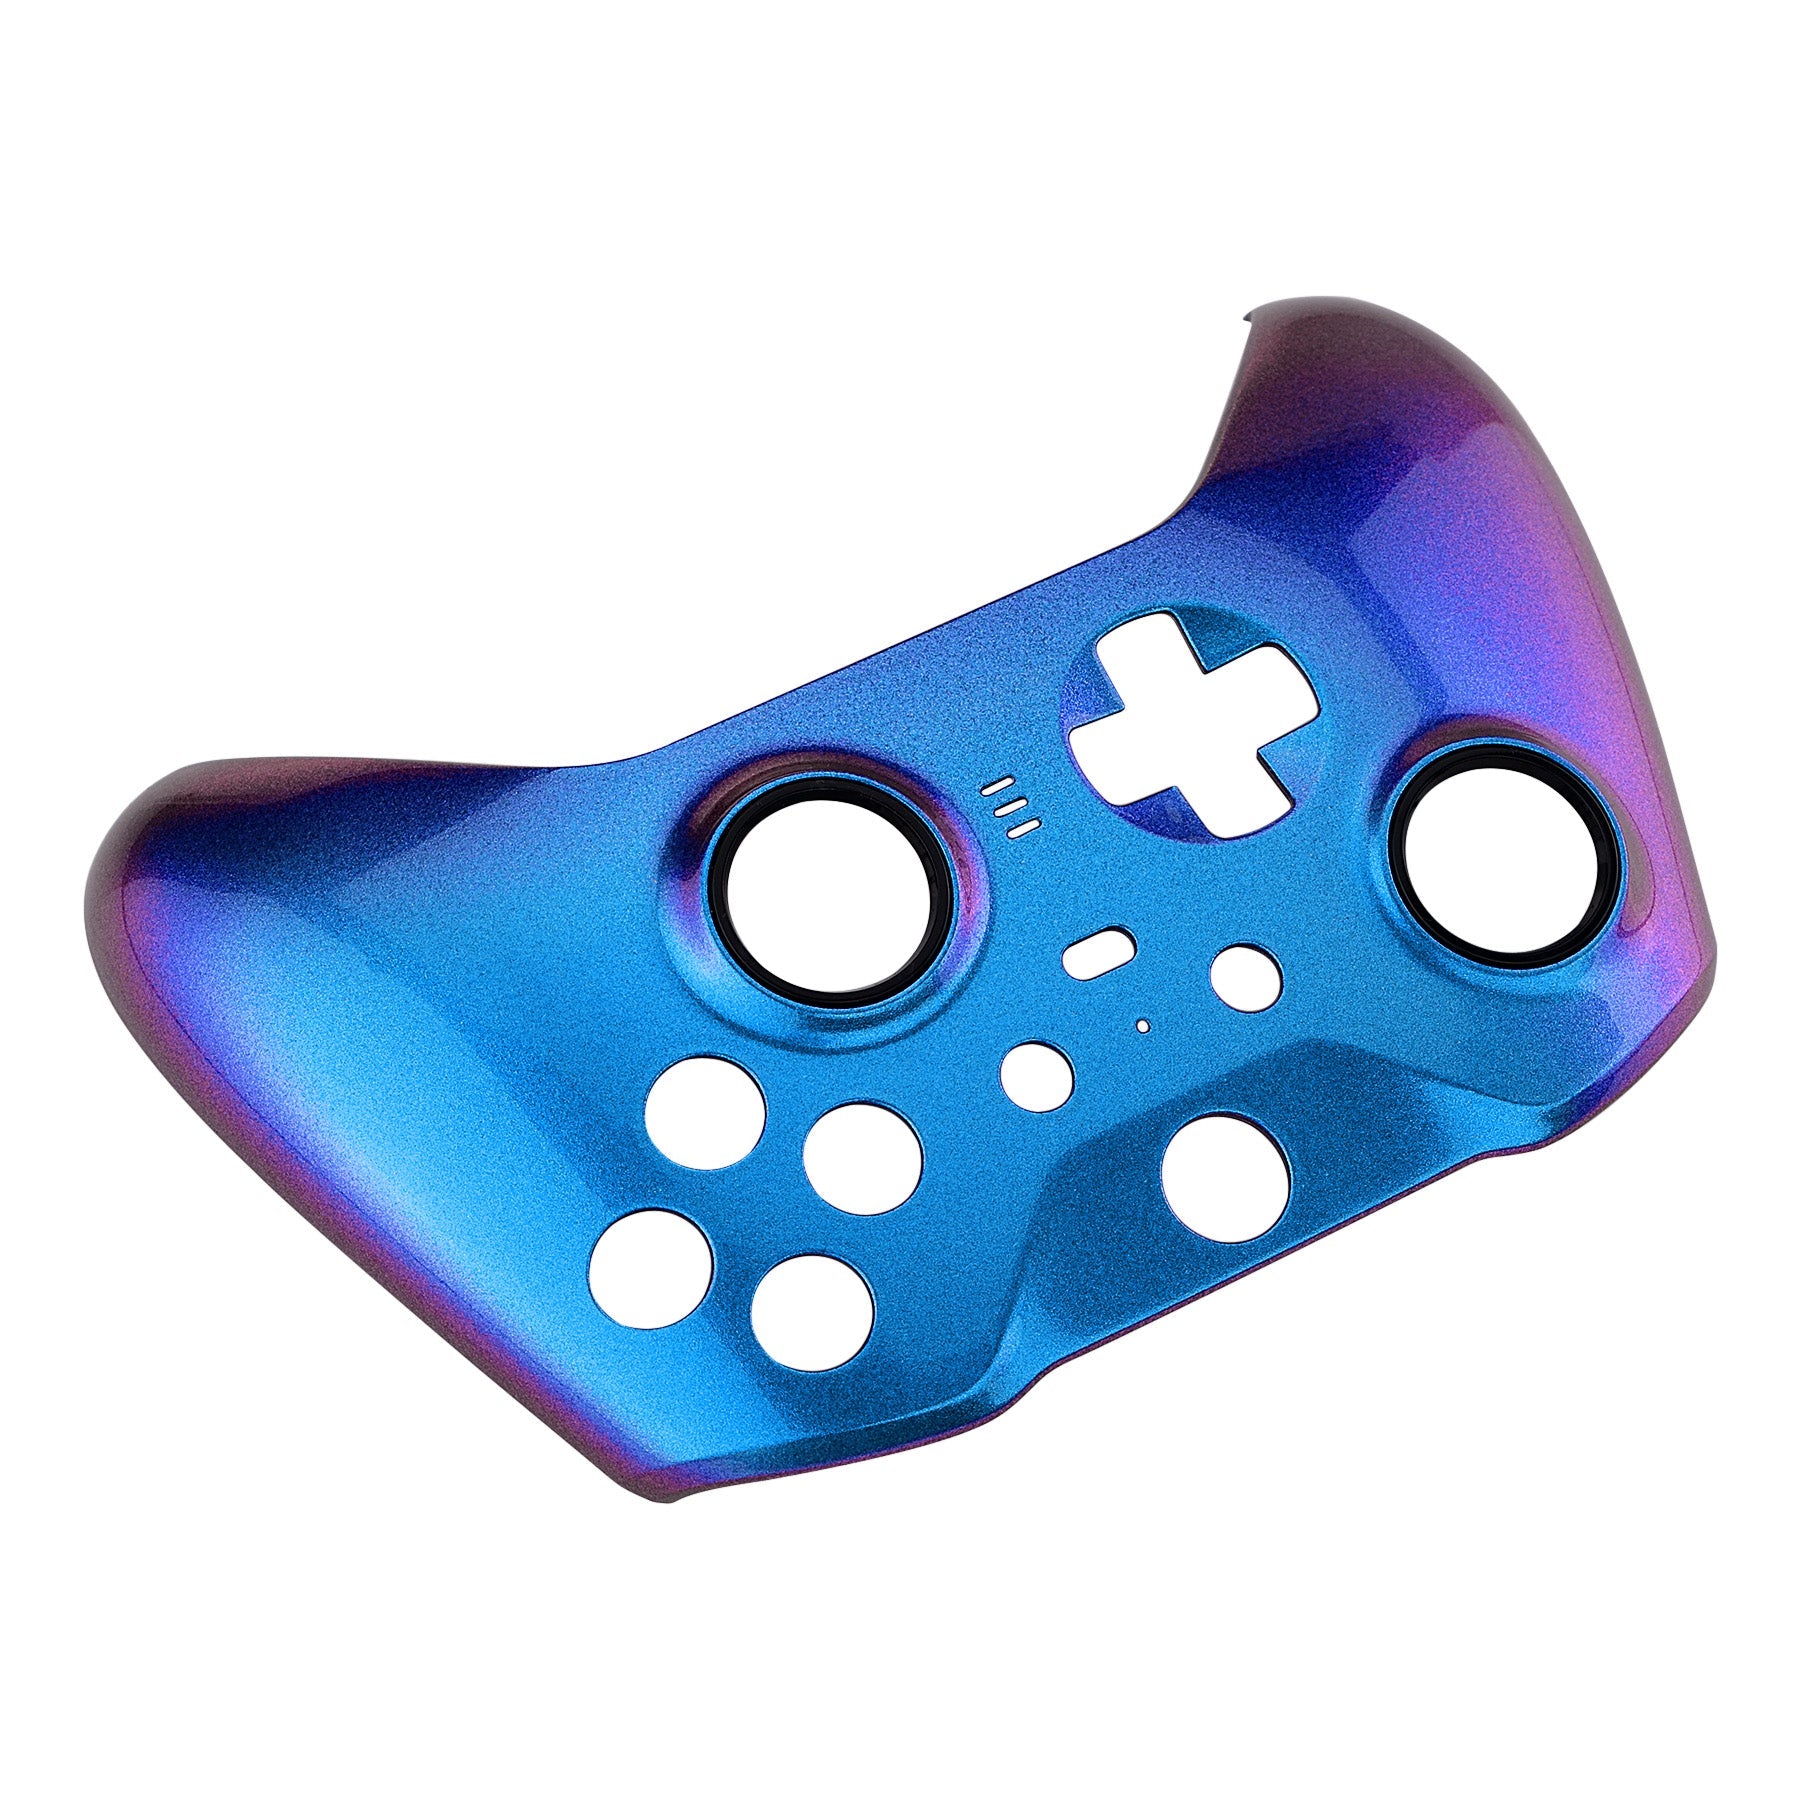 eXtremeRate Retail Chameleon Purple Blue Faceplate Cover, Glossy Front Housing Shell Case Replacement Kit for Xbox One Elite Series 2 Controller (Model 1797 and Core Model 1797) - Thumbstick Accent Rings Included - ELP301